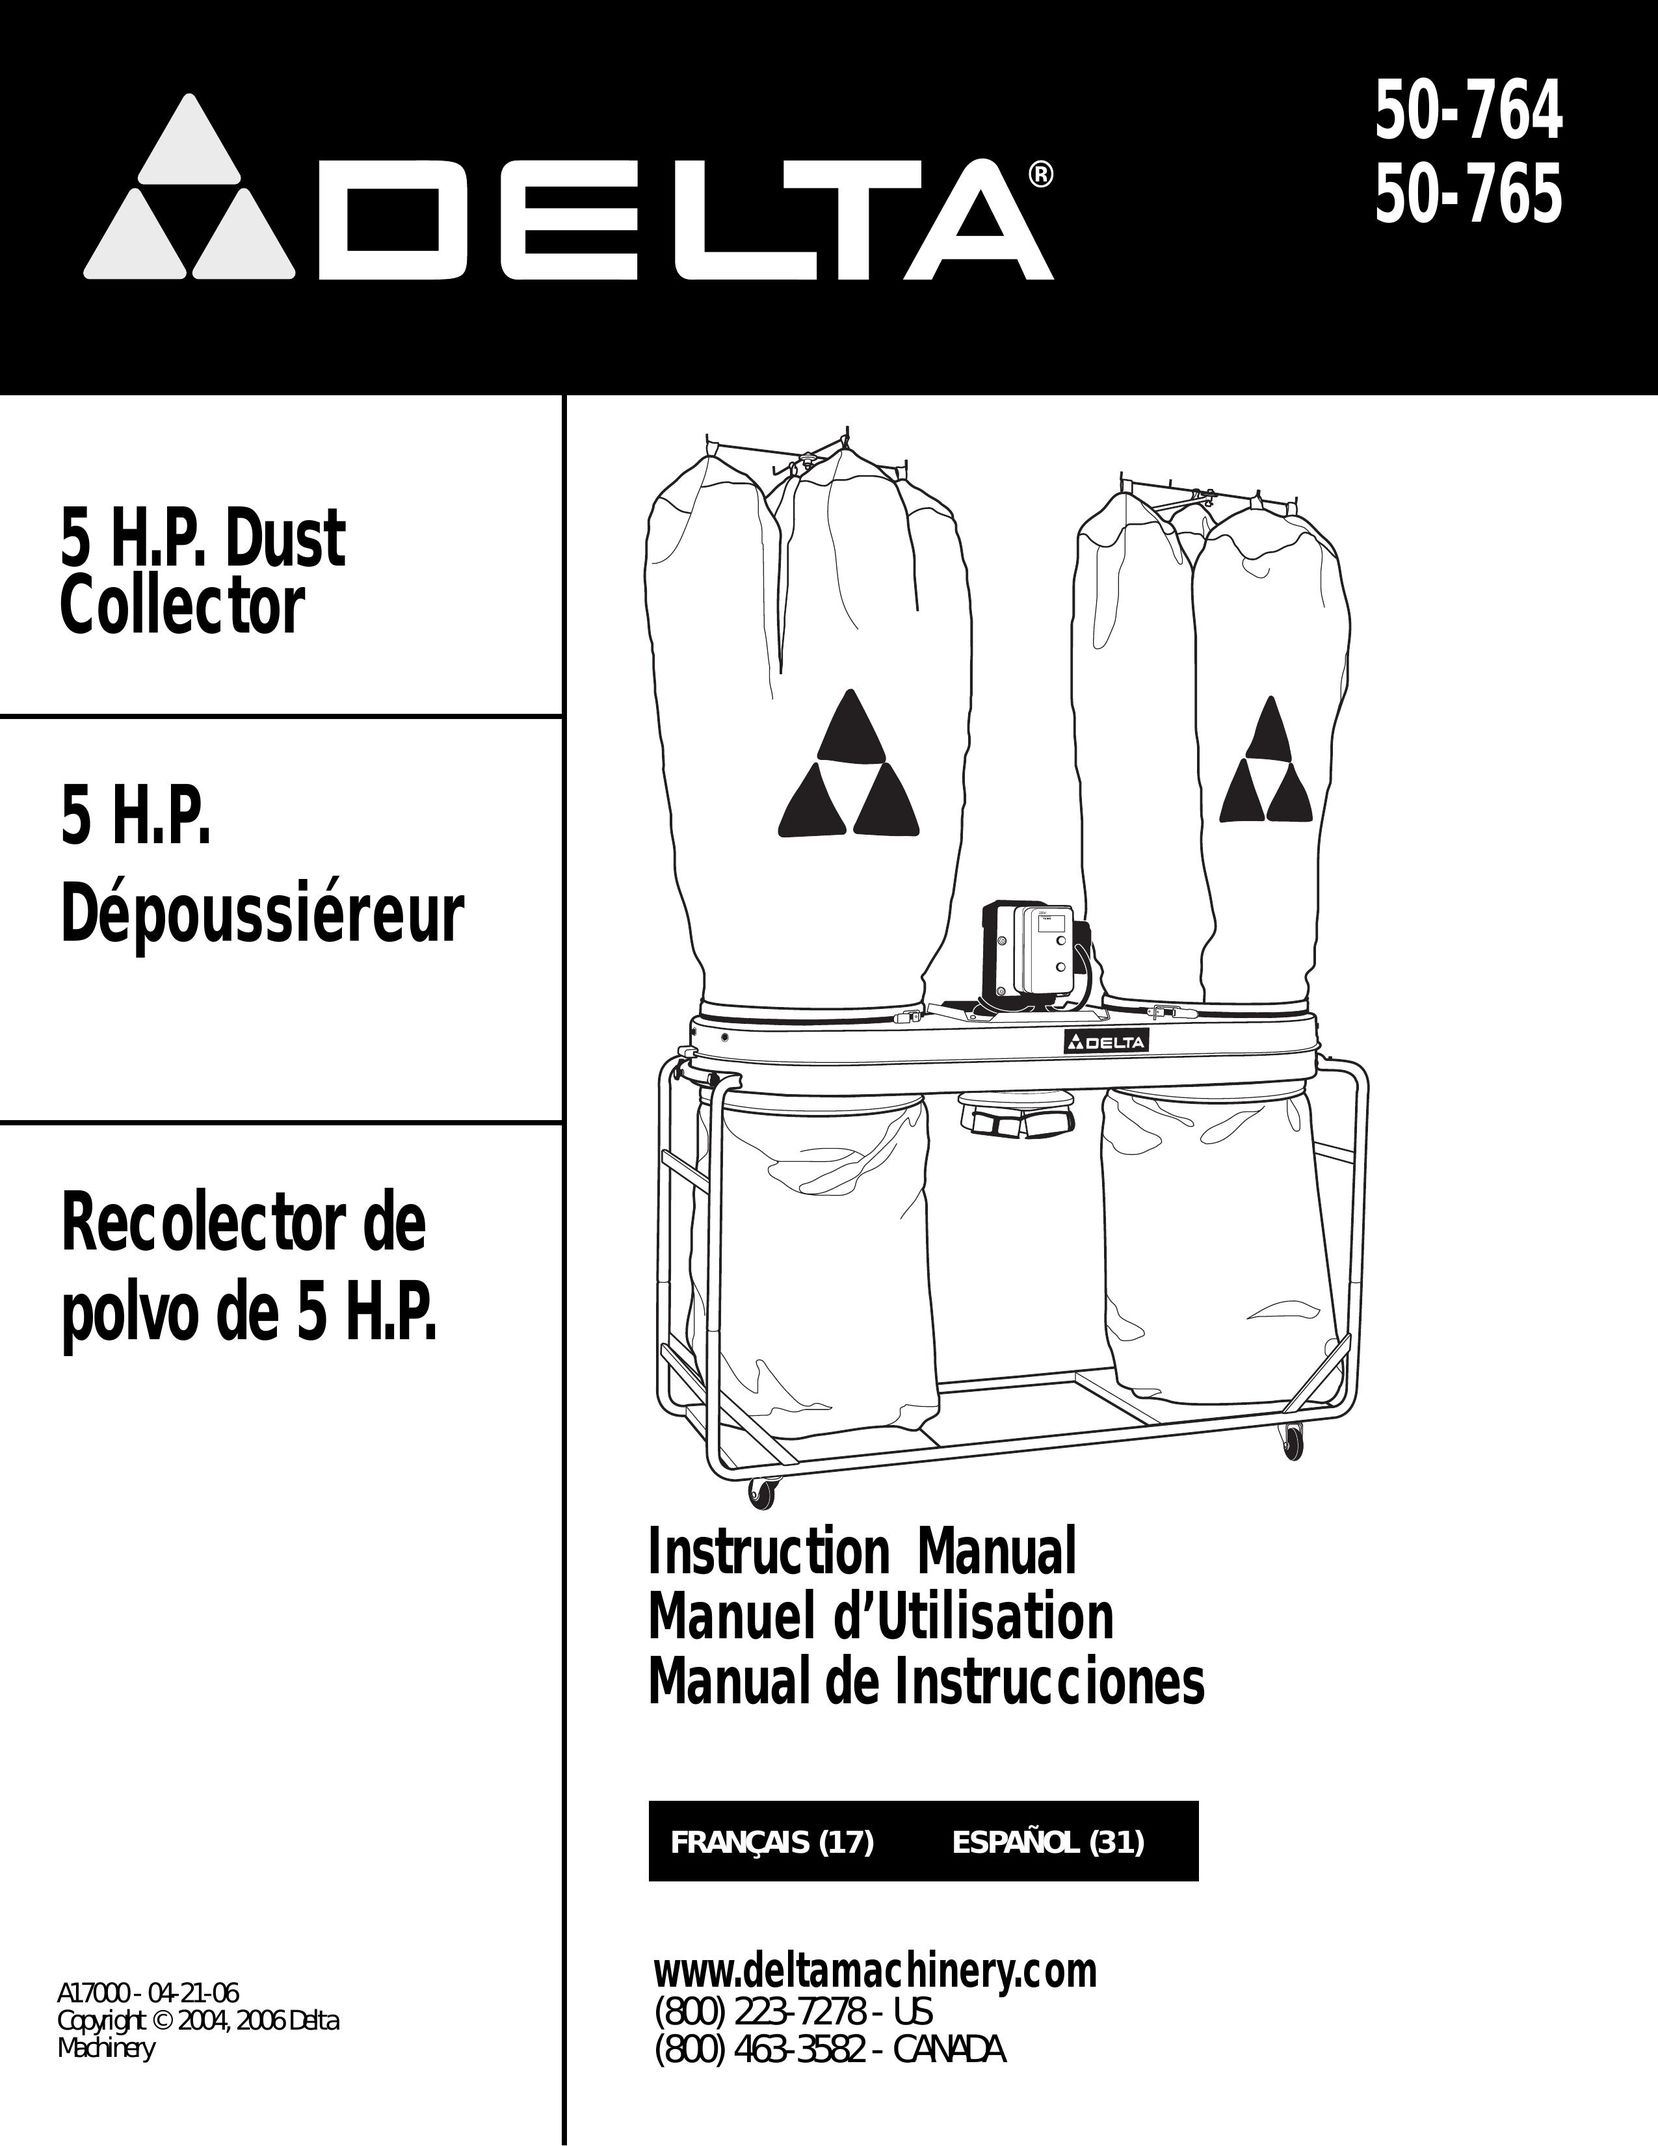 Delta 50-765 Dust Collector User Manual